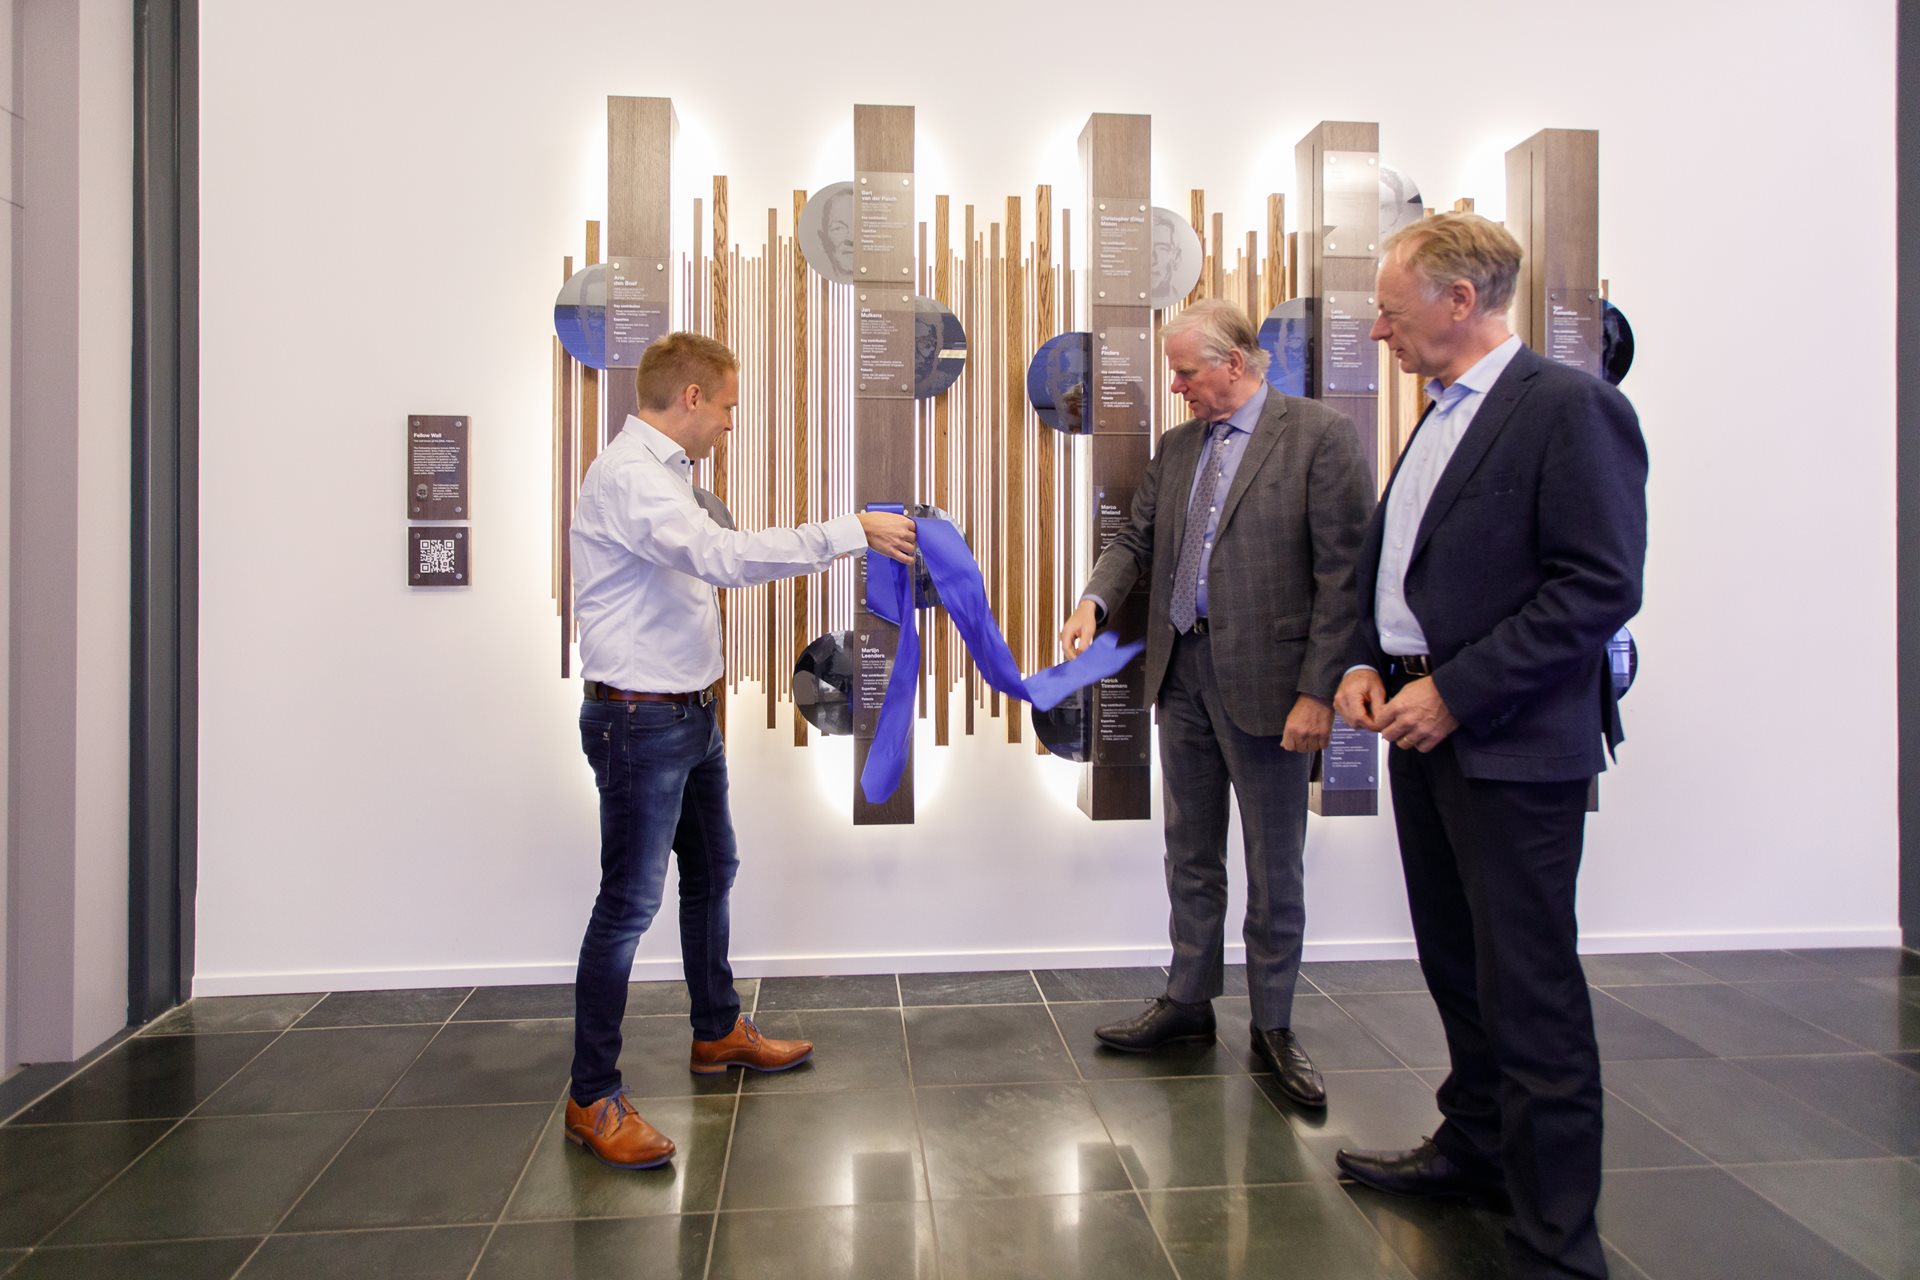 CTO and President Martin van der Brink, Vice President Jos Benschop and Simon unveil his plaque on the ASML Fellow wall.